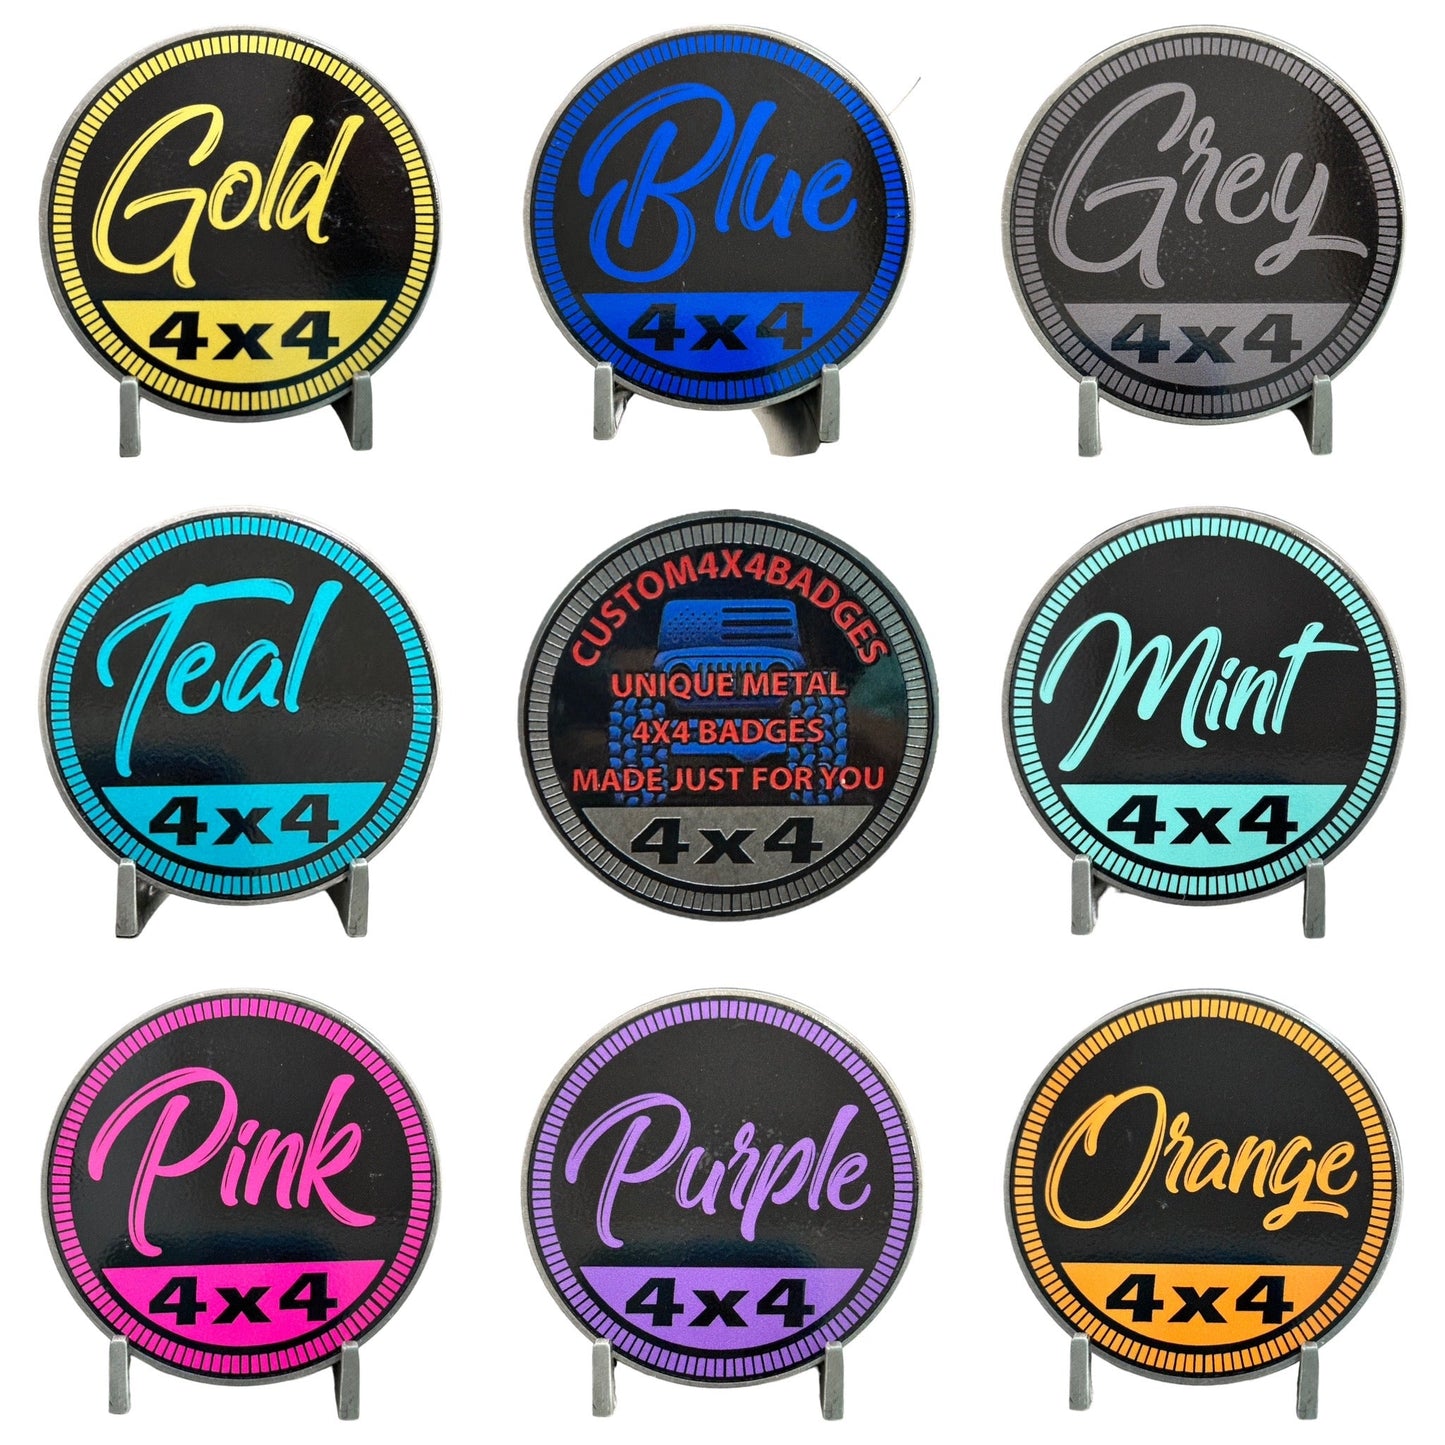 Low Country Jeep Ryderz (Multiple Colors Available)